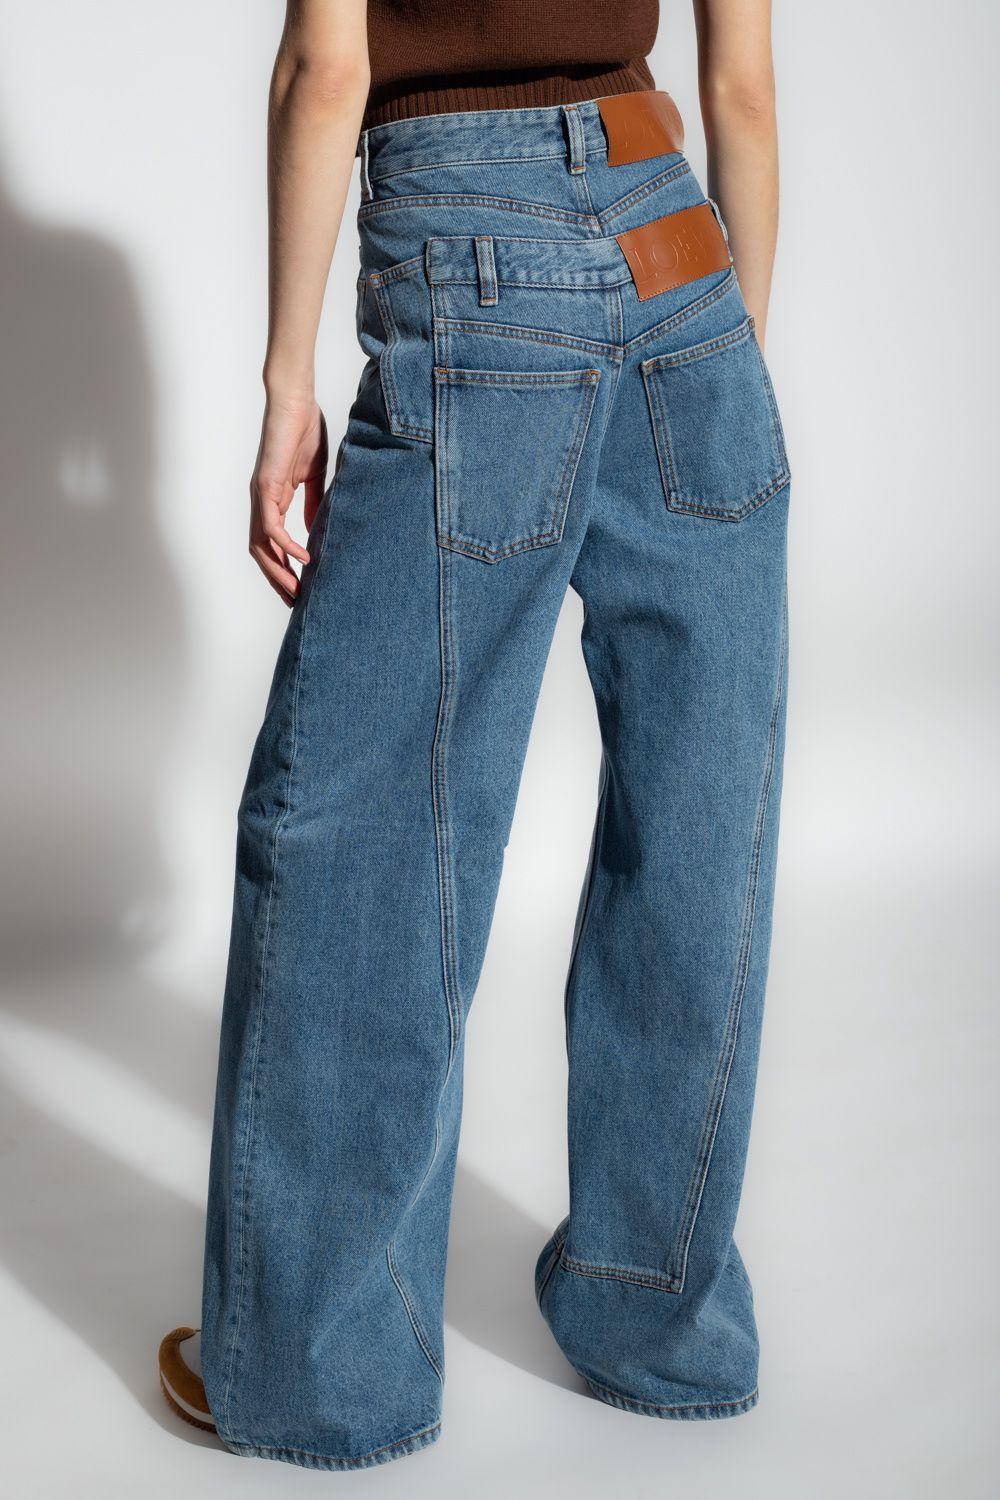 Loewe Double-waistband Jeans in Blue